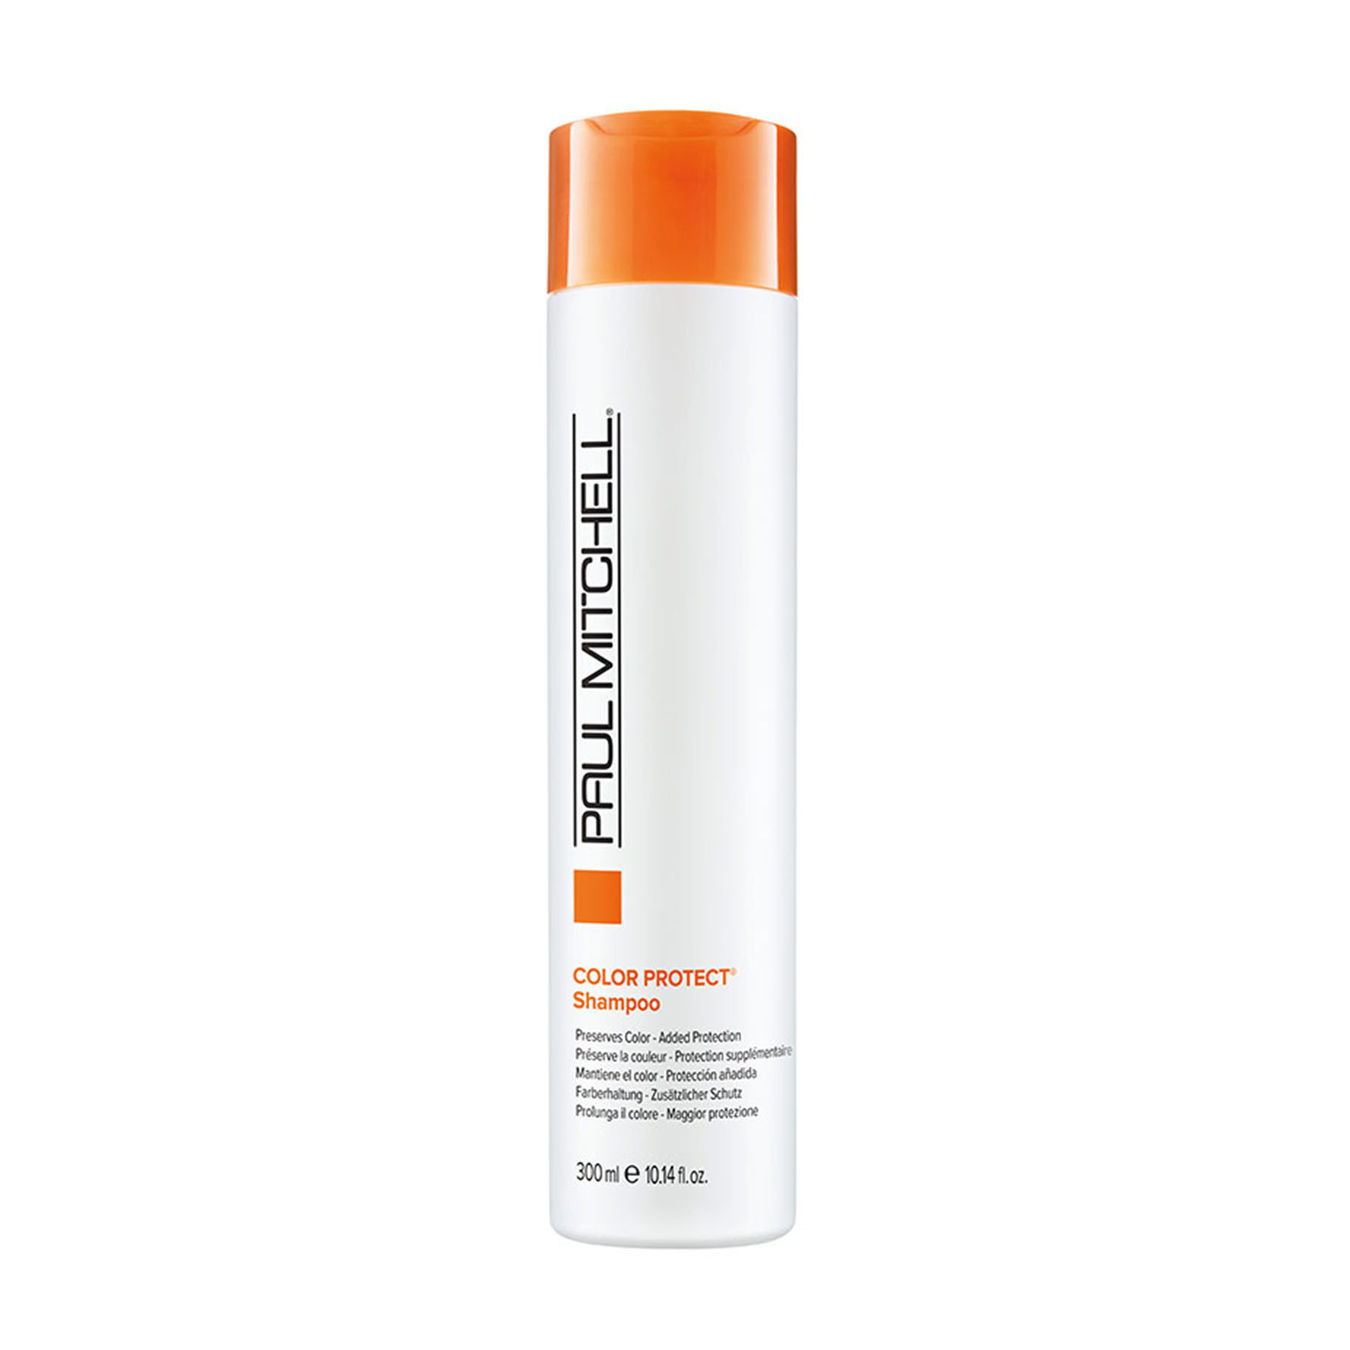 Paul Mitchell Color Protect Shampoo von Paul Mitchell